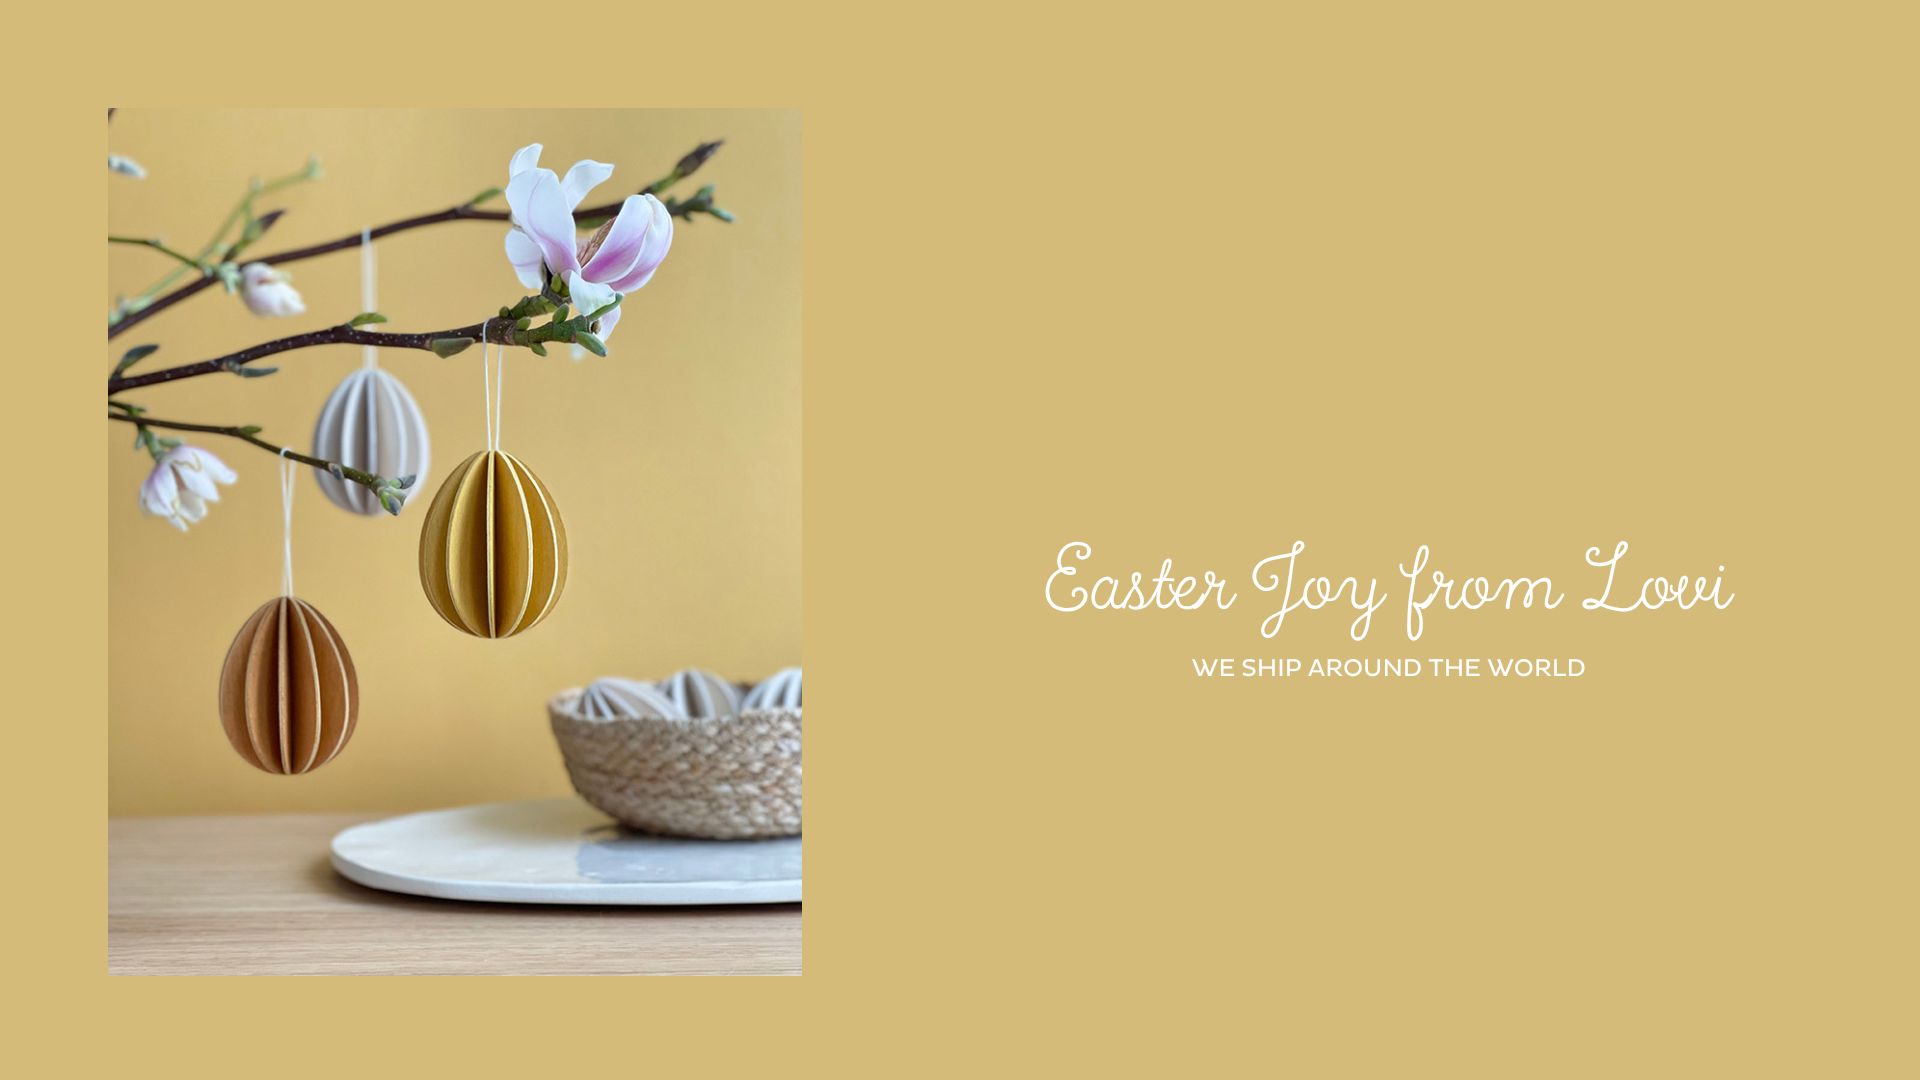 Wooden Lovi Eggs hanging on the branch, frontpage image